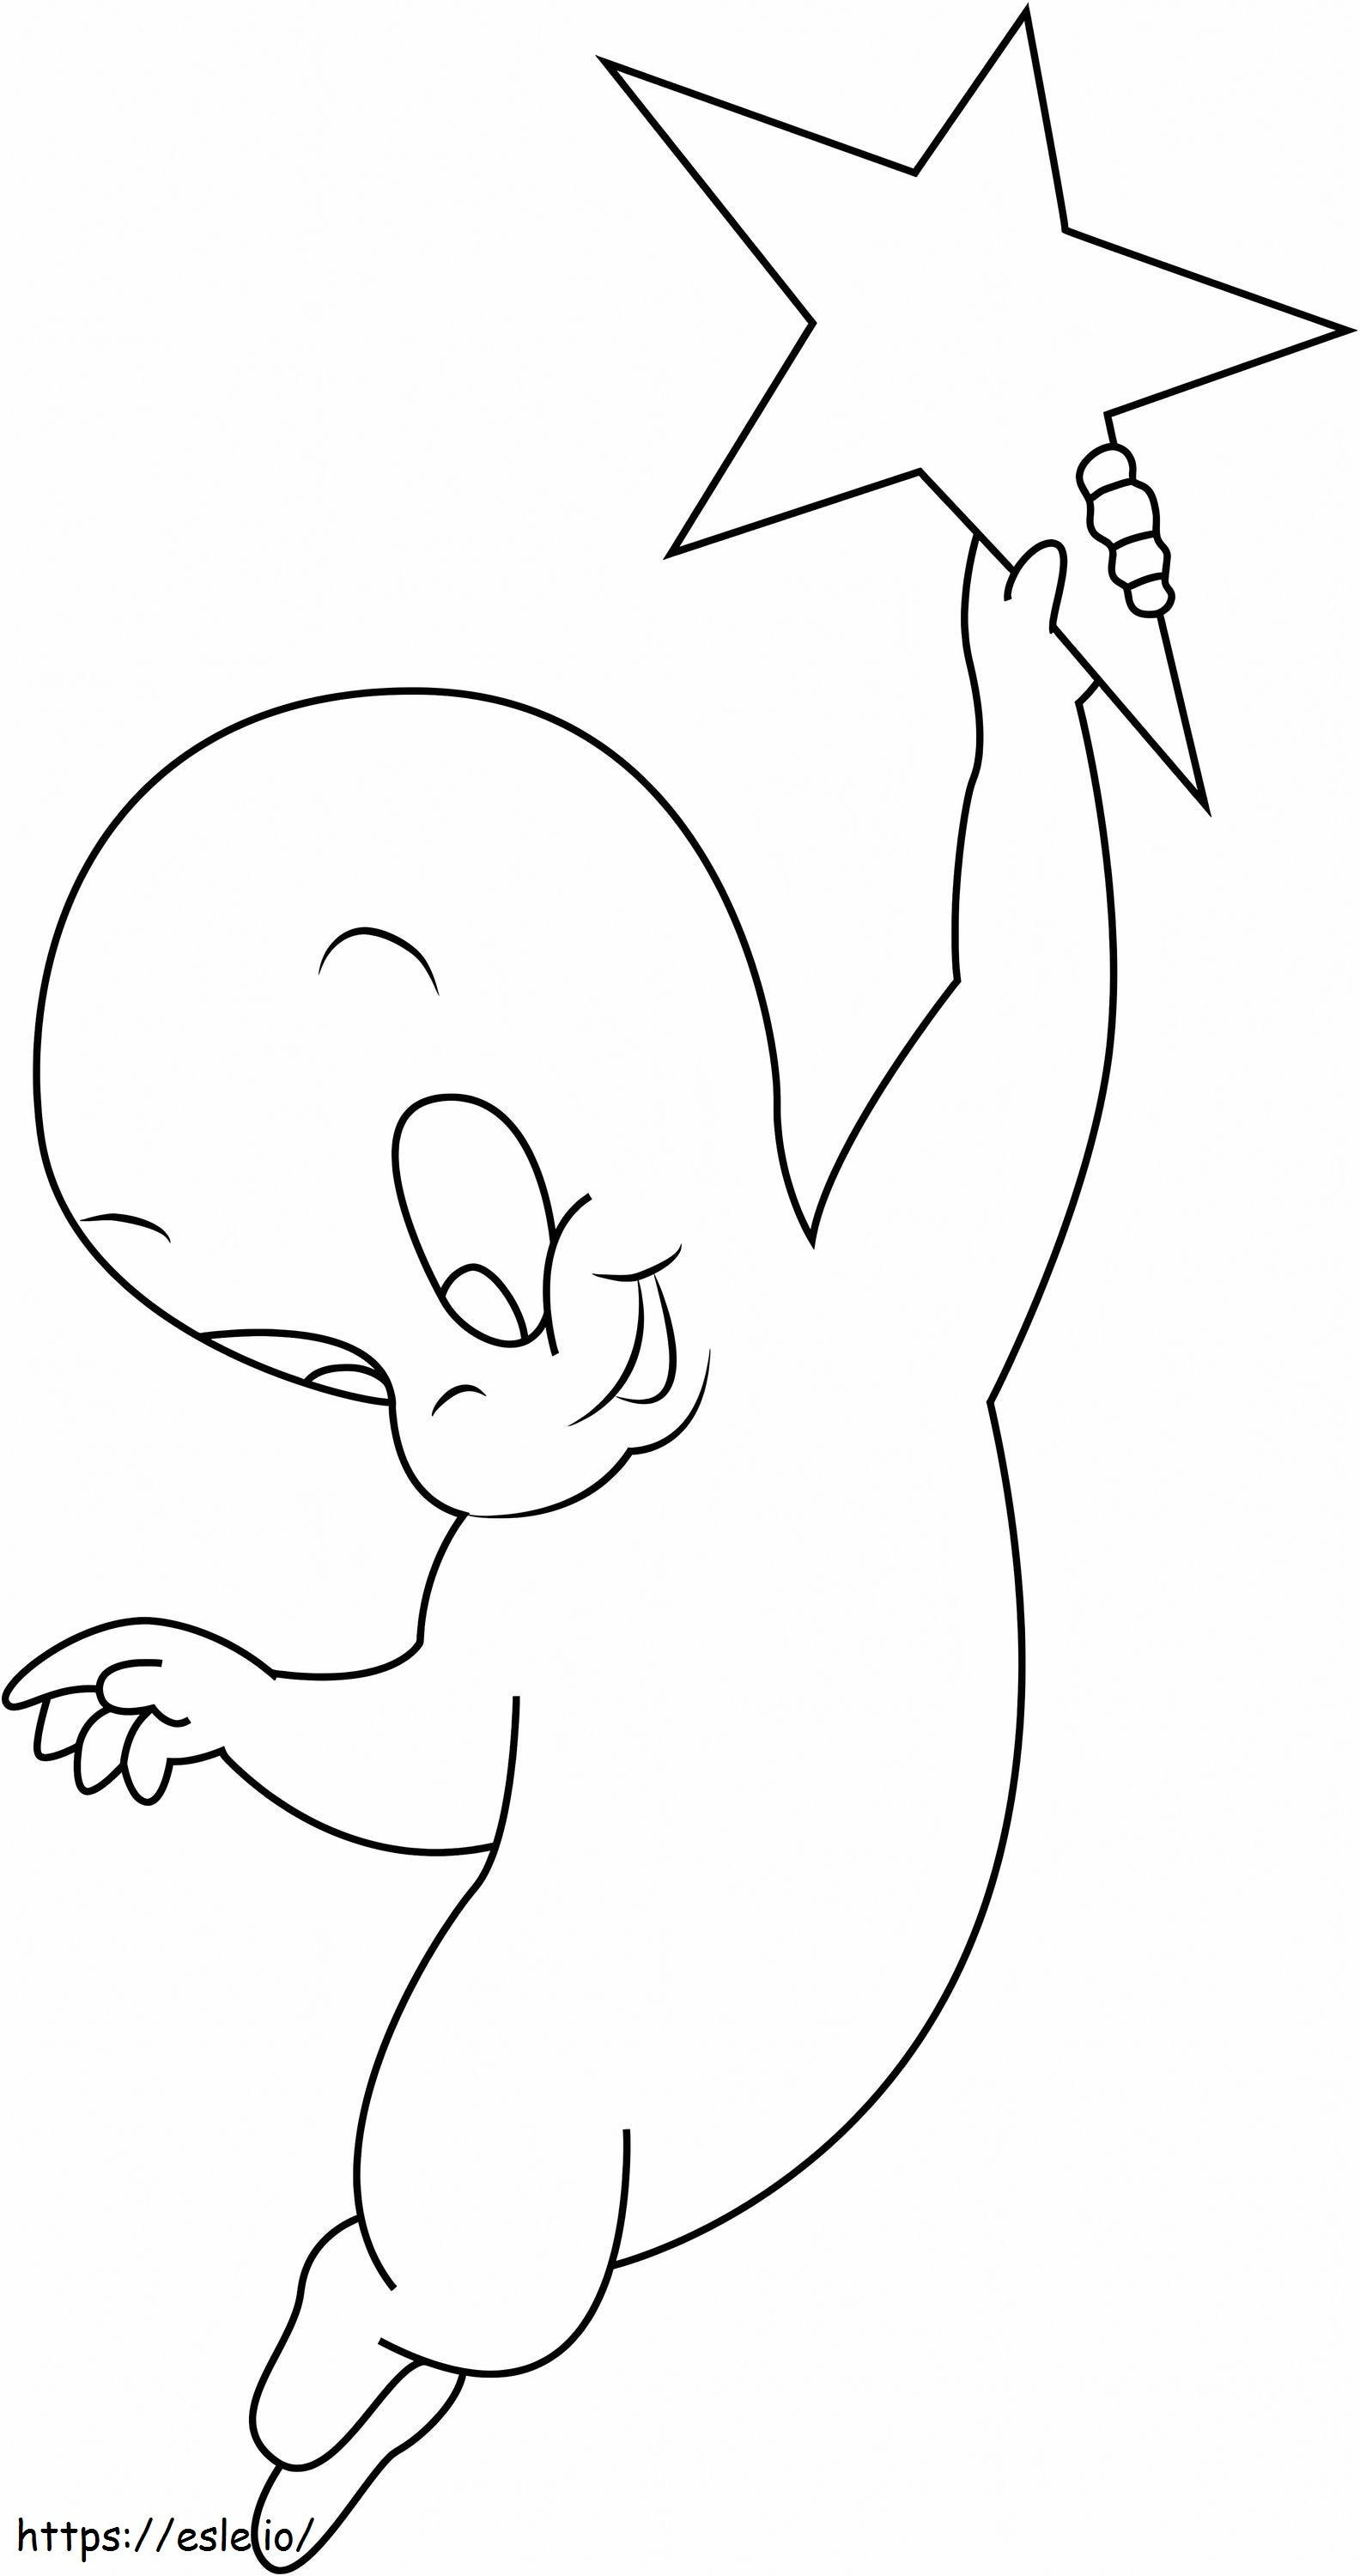 1531536317 Friendly Ghost With Star A4 coloring page